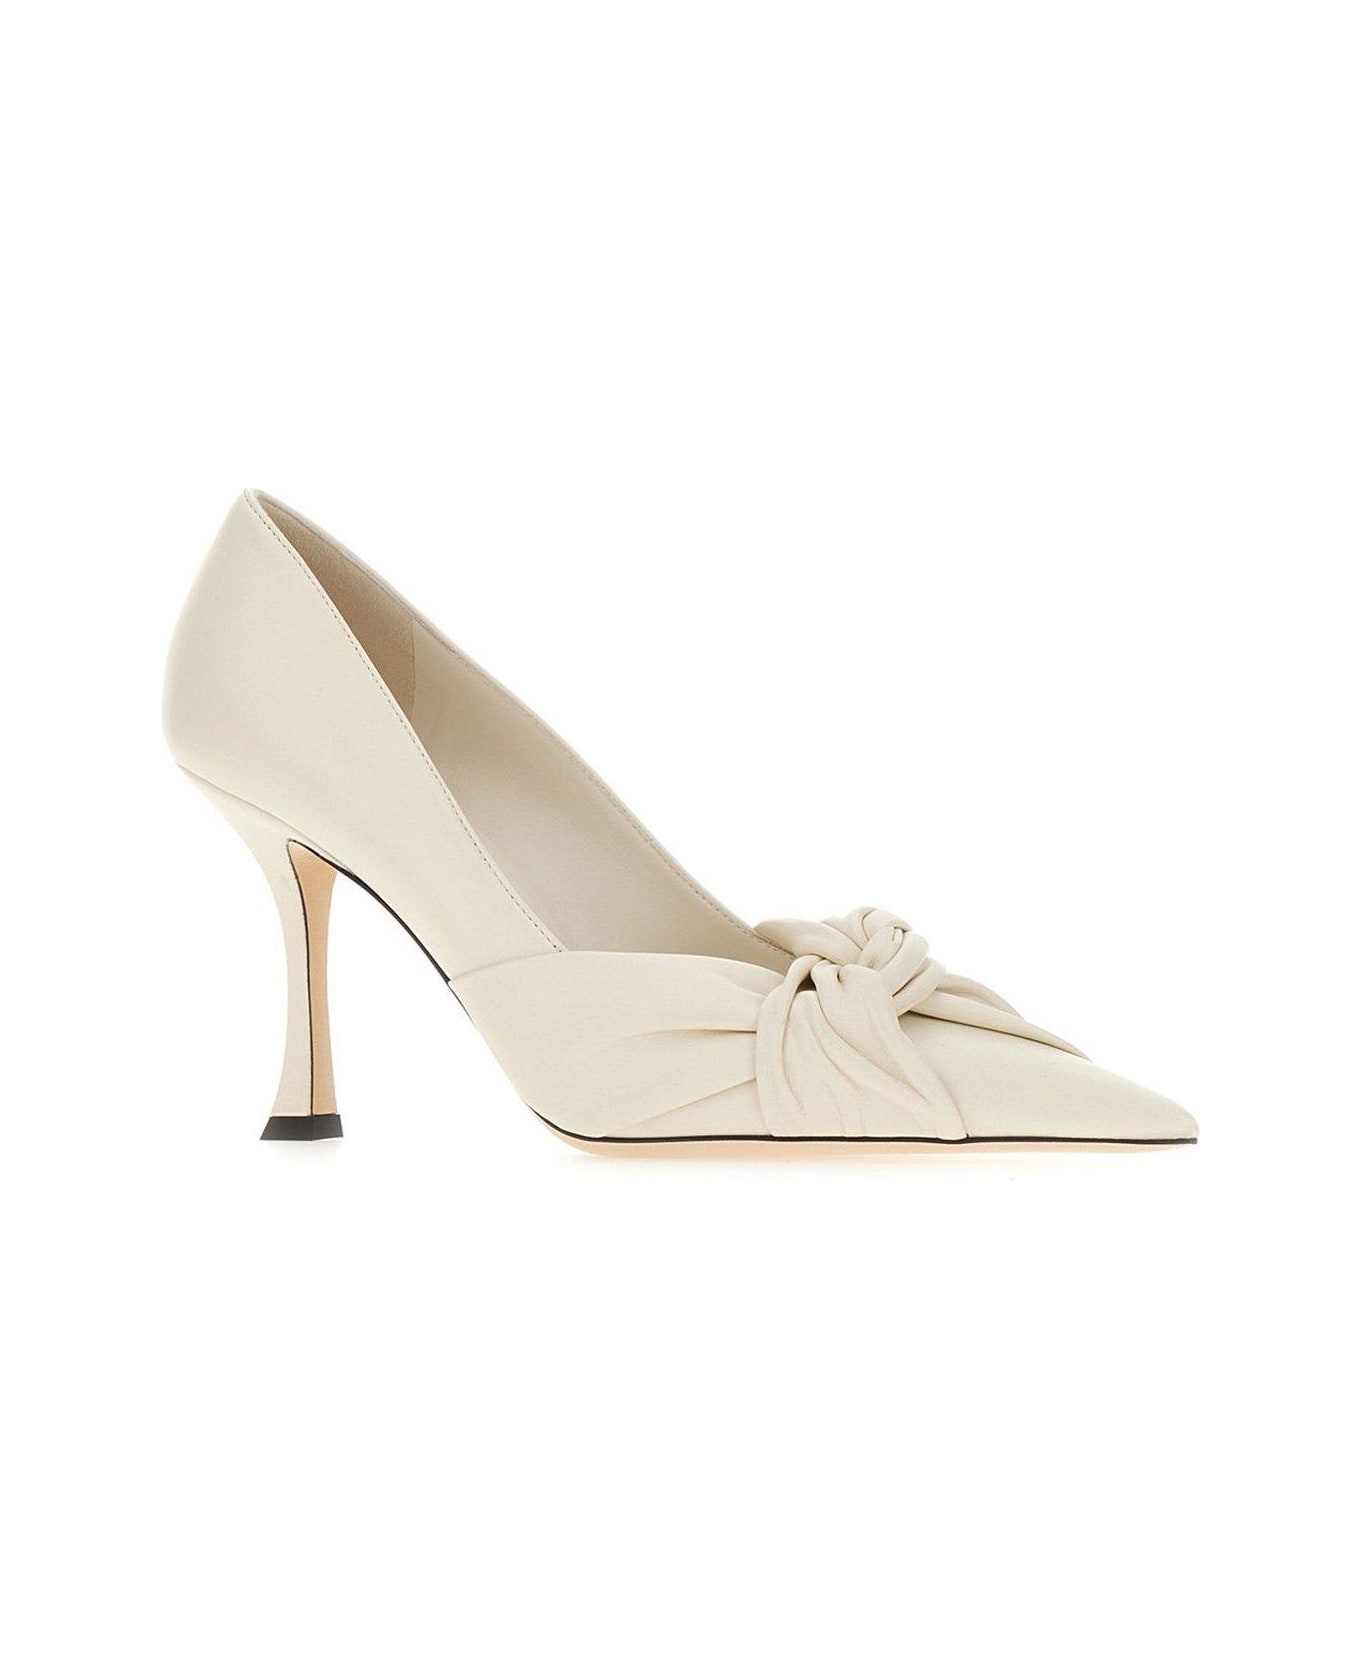 Jimmy Choo Hedera 90 Knot-detailed Pointed-toe Pumps - Milk